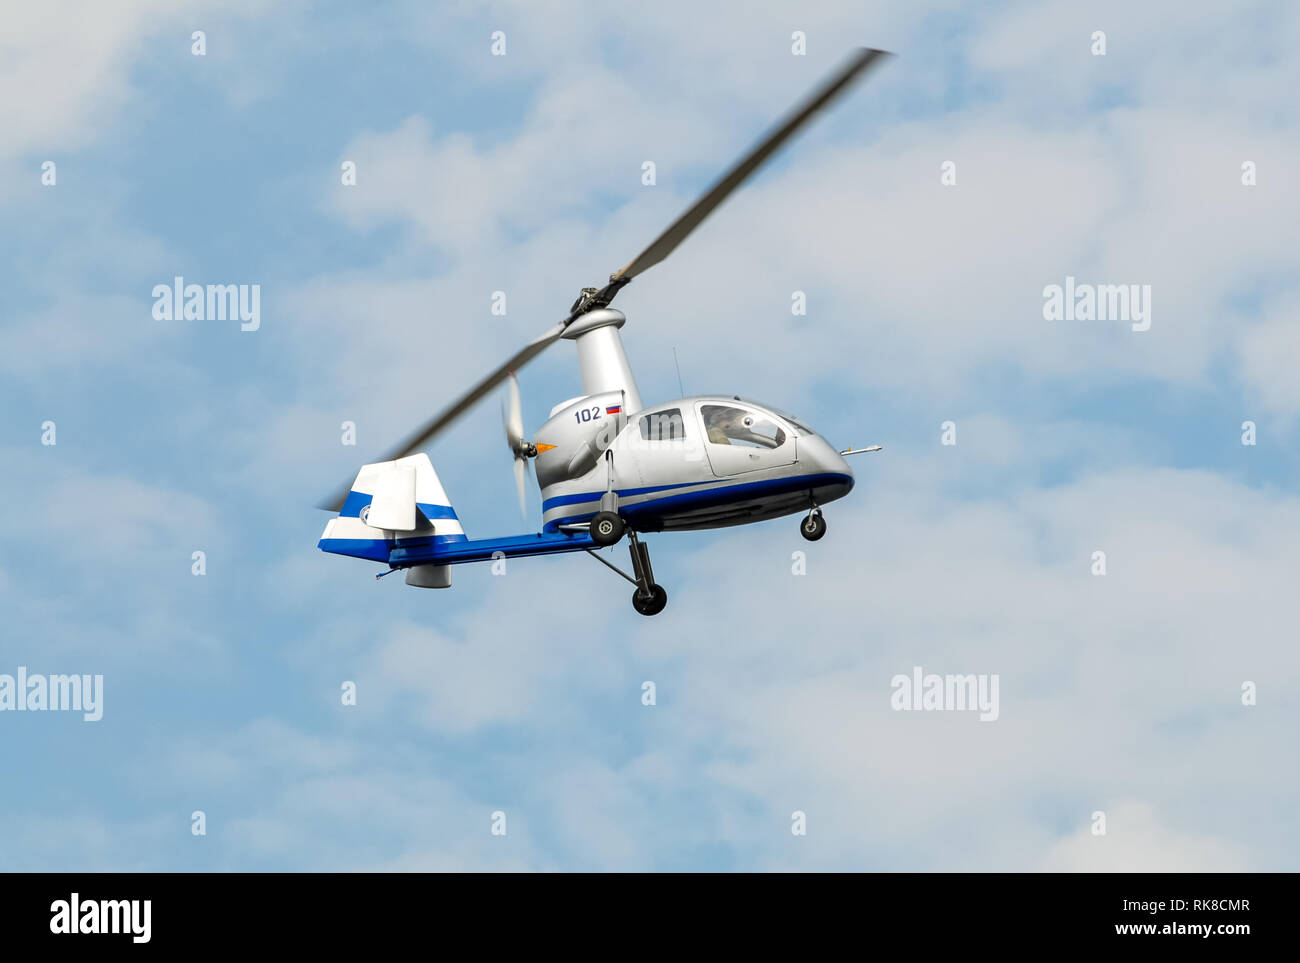 Moscow, Russia - February 23, 2012: Civil Russian helicopter at an airshow in Moscow. Stock Photo